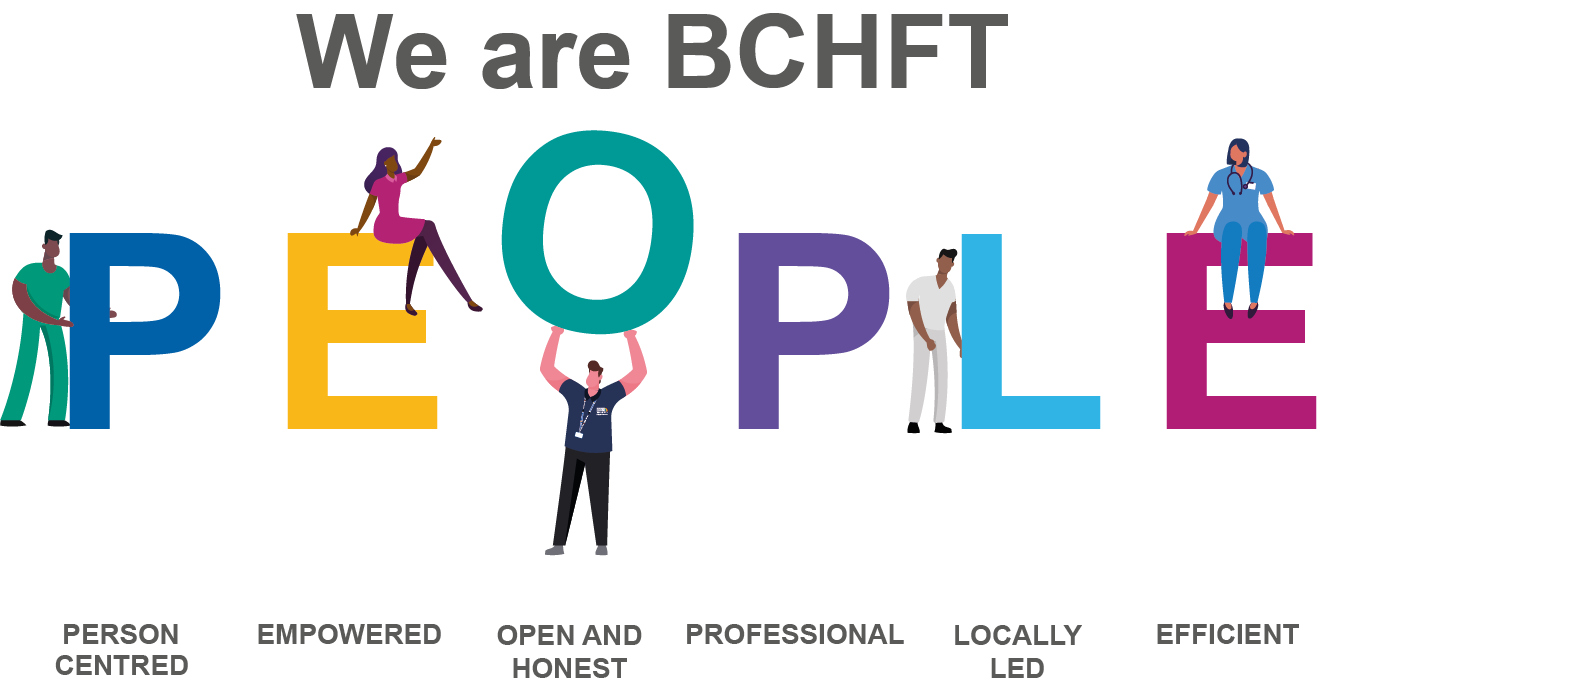 We are BCHFT People: Person centred Empowered Open and honest Professional Locally led and Efficient